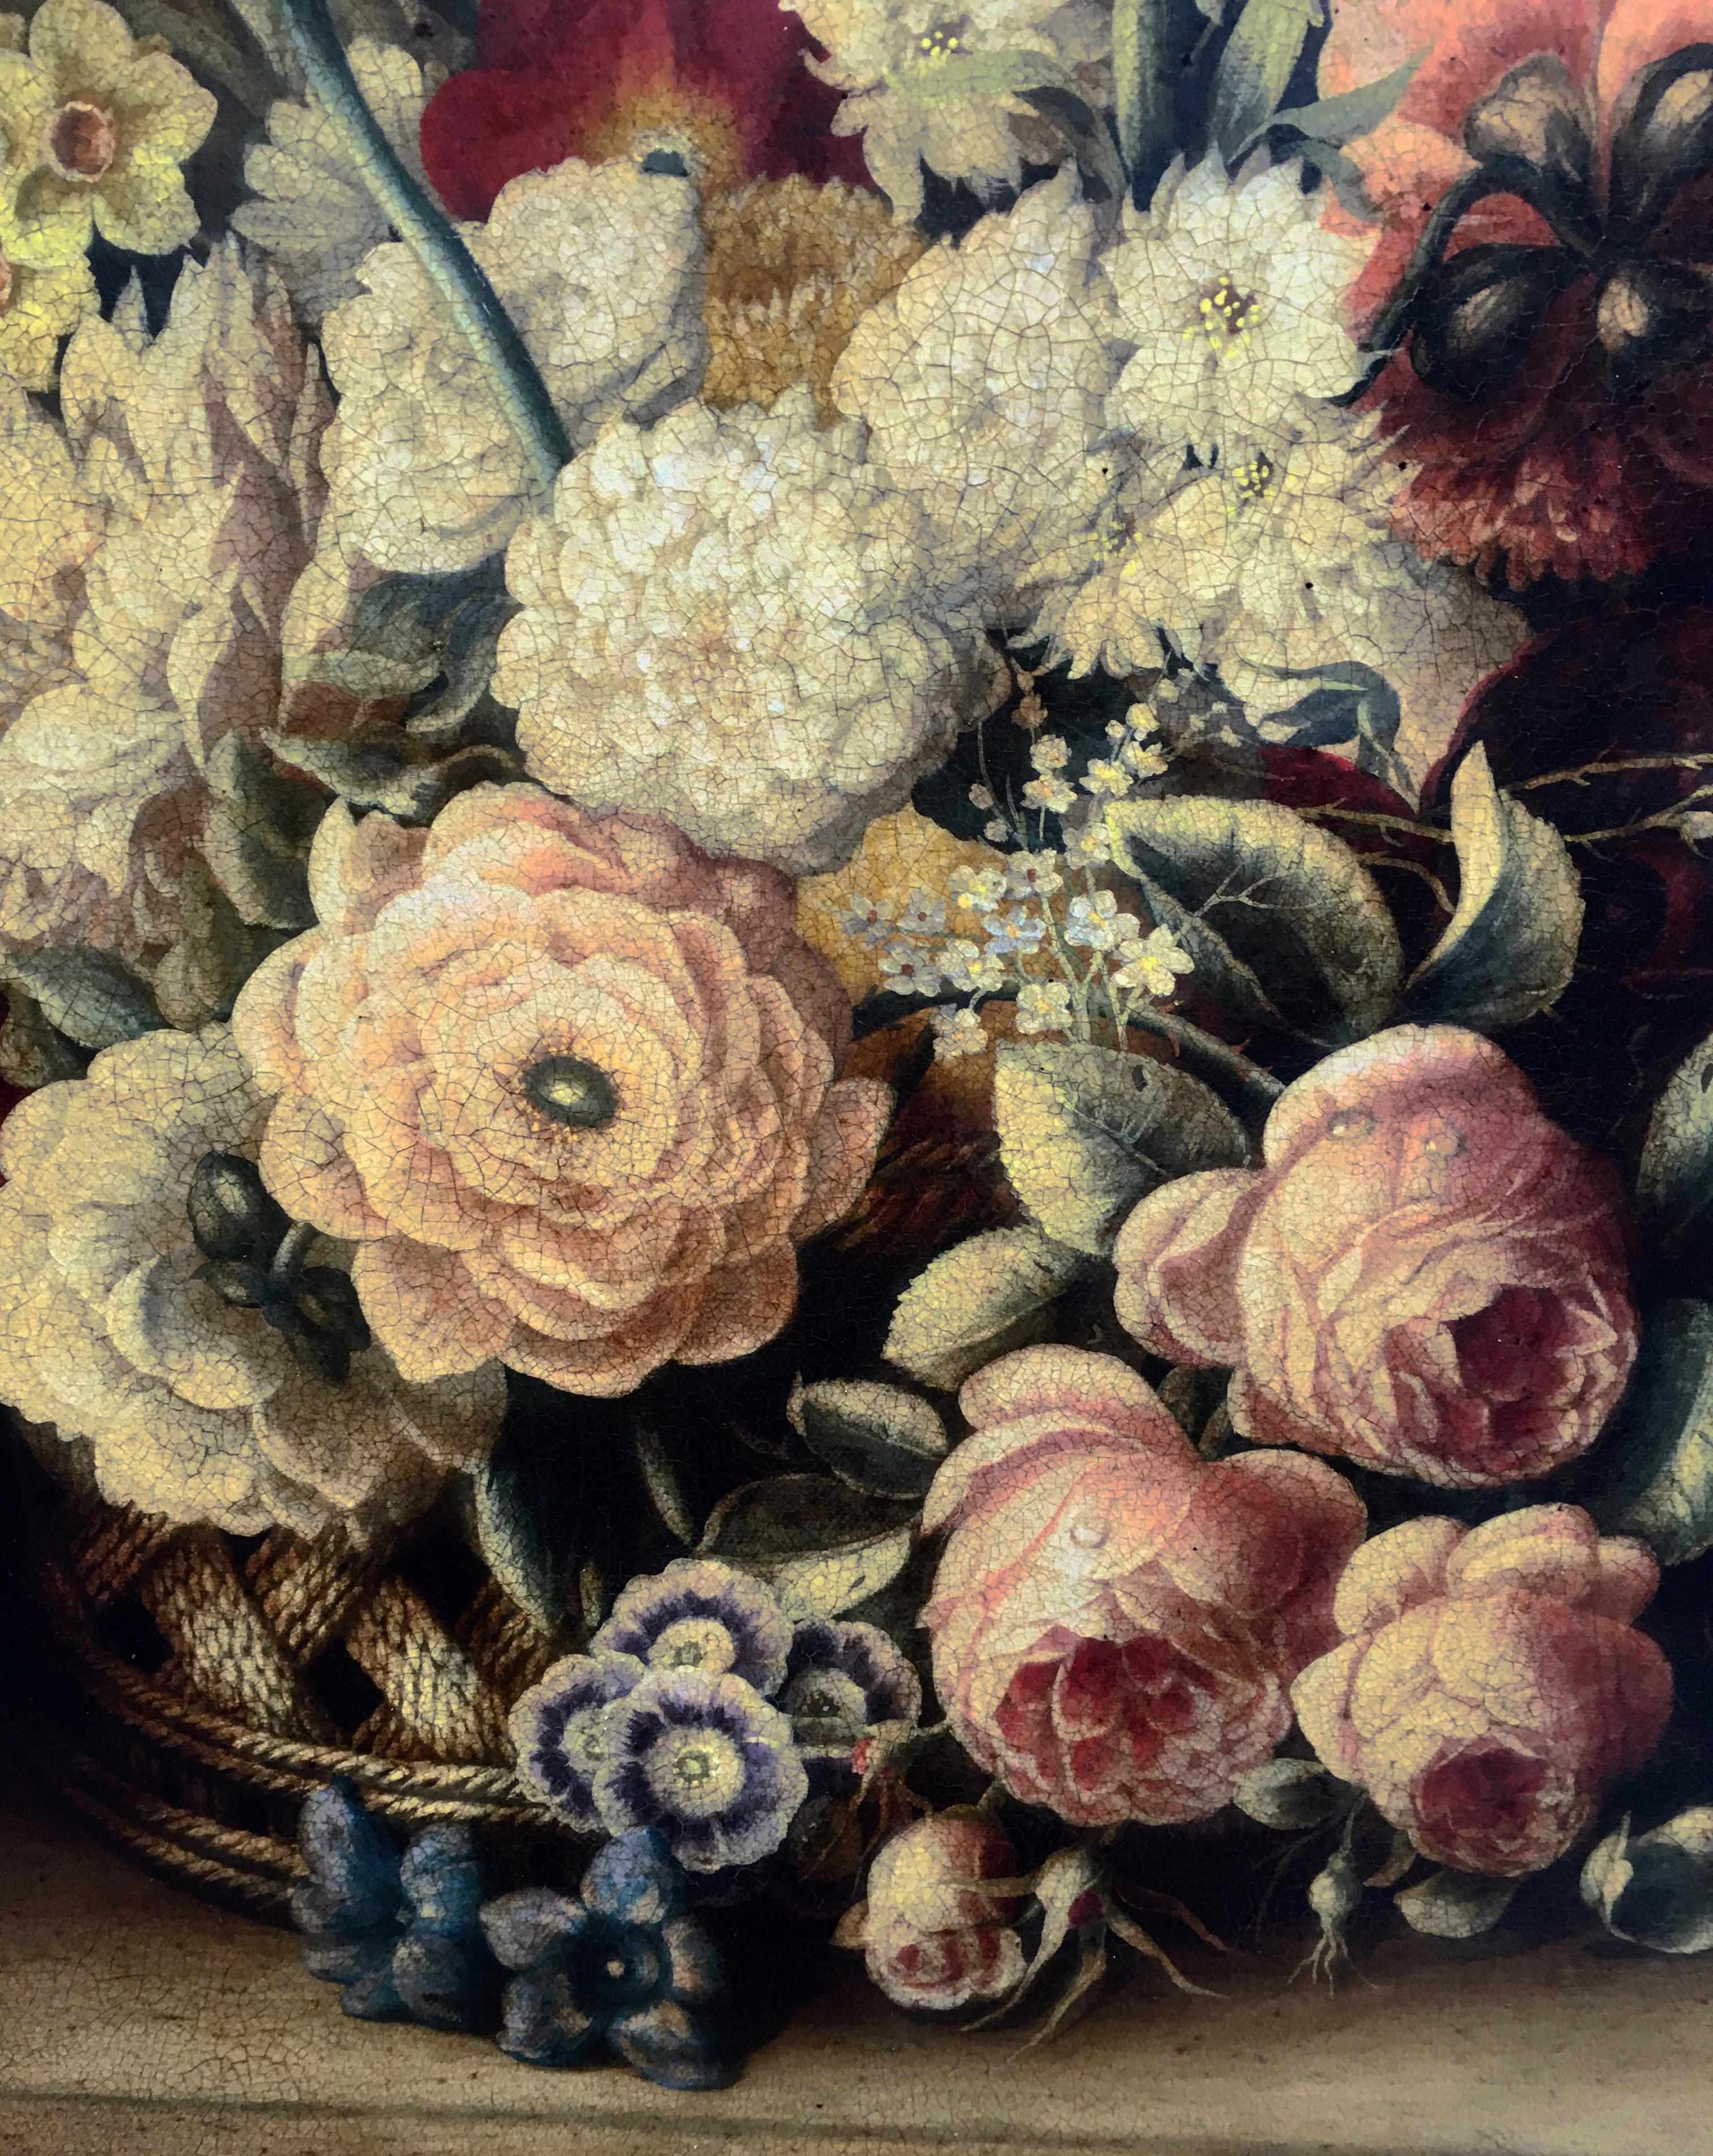 Flowers - Carlo De Tommasi Italia 2013 - Oil on canvas mis. cm. 110x90. 
Gold leaf gilded and laquered wooden frame ext. mis .cm. 130x110.
The painting by the painter Carlo De Tommasi is a wonderful inspiration to the famous Dutch painter of the